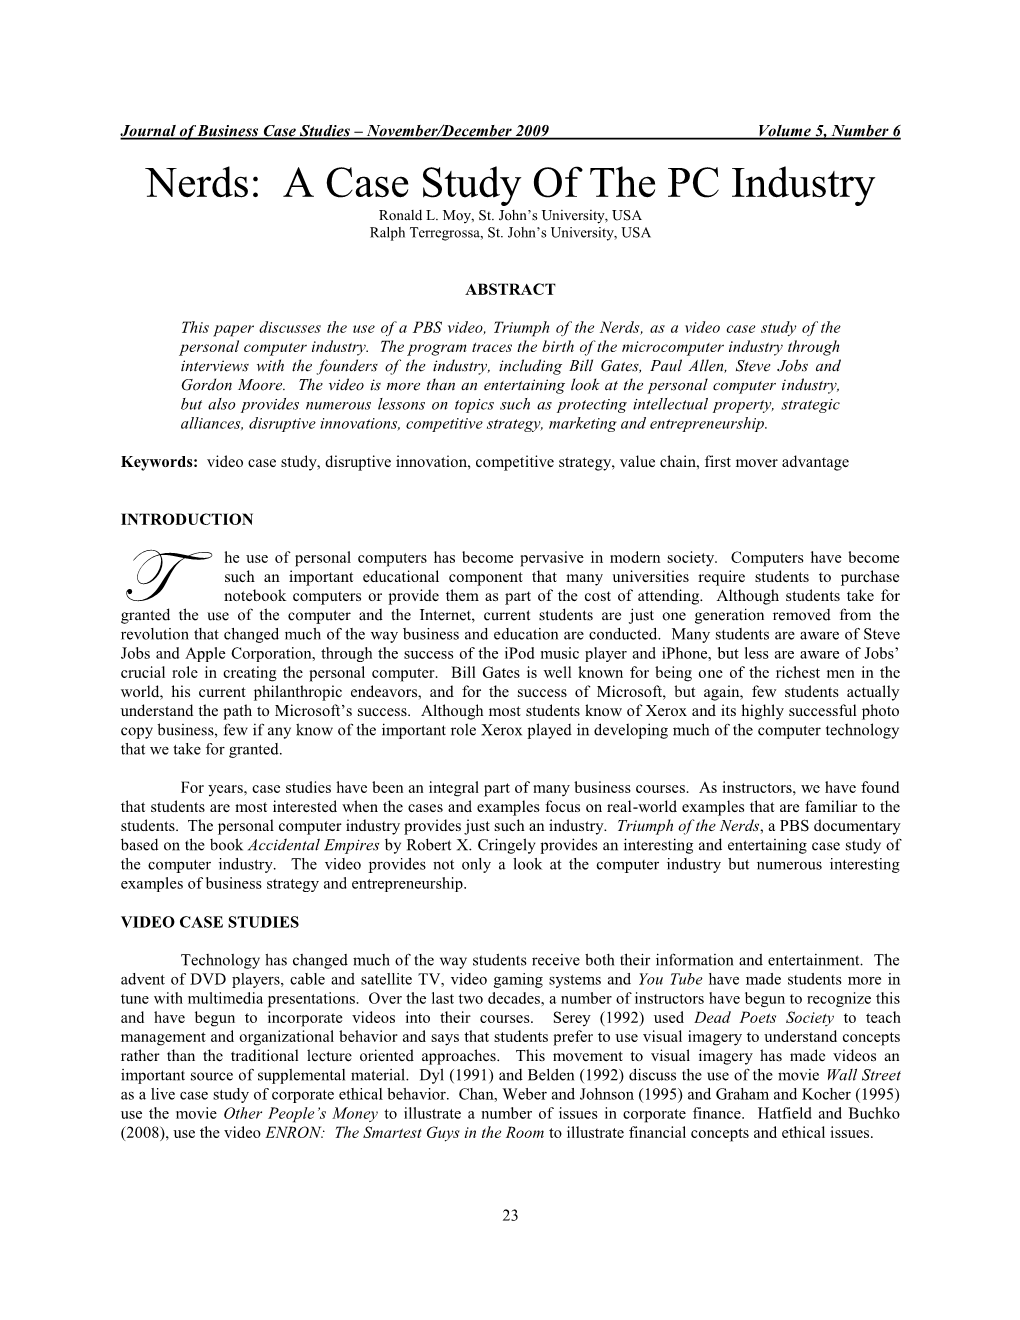 Nerds: a Case Study of the PC Industry Ronald L